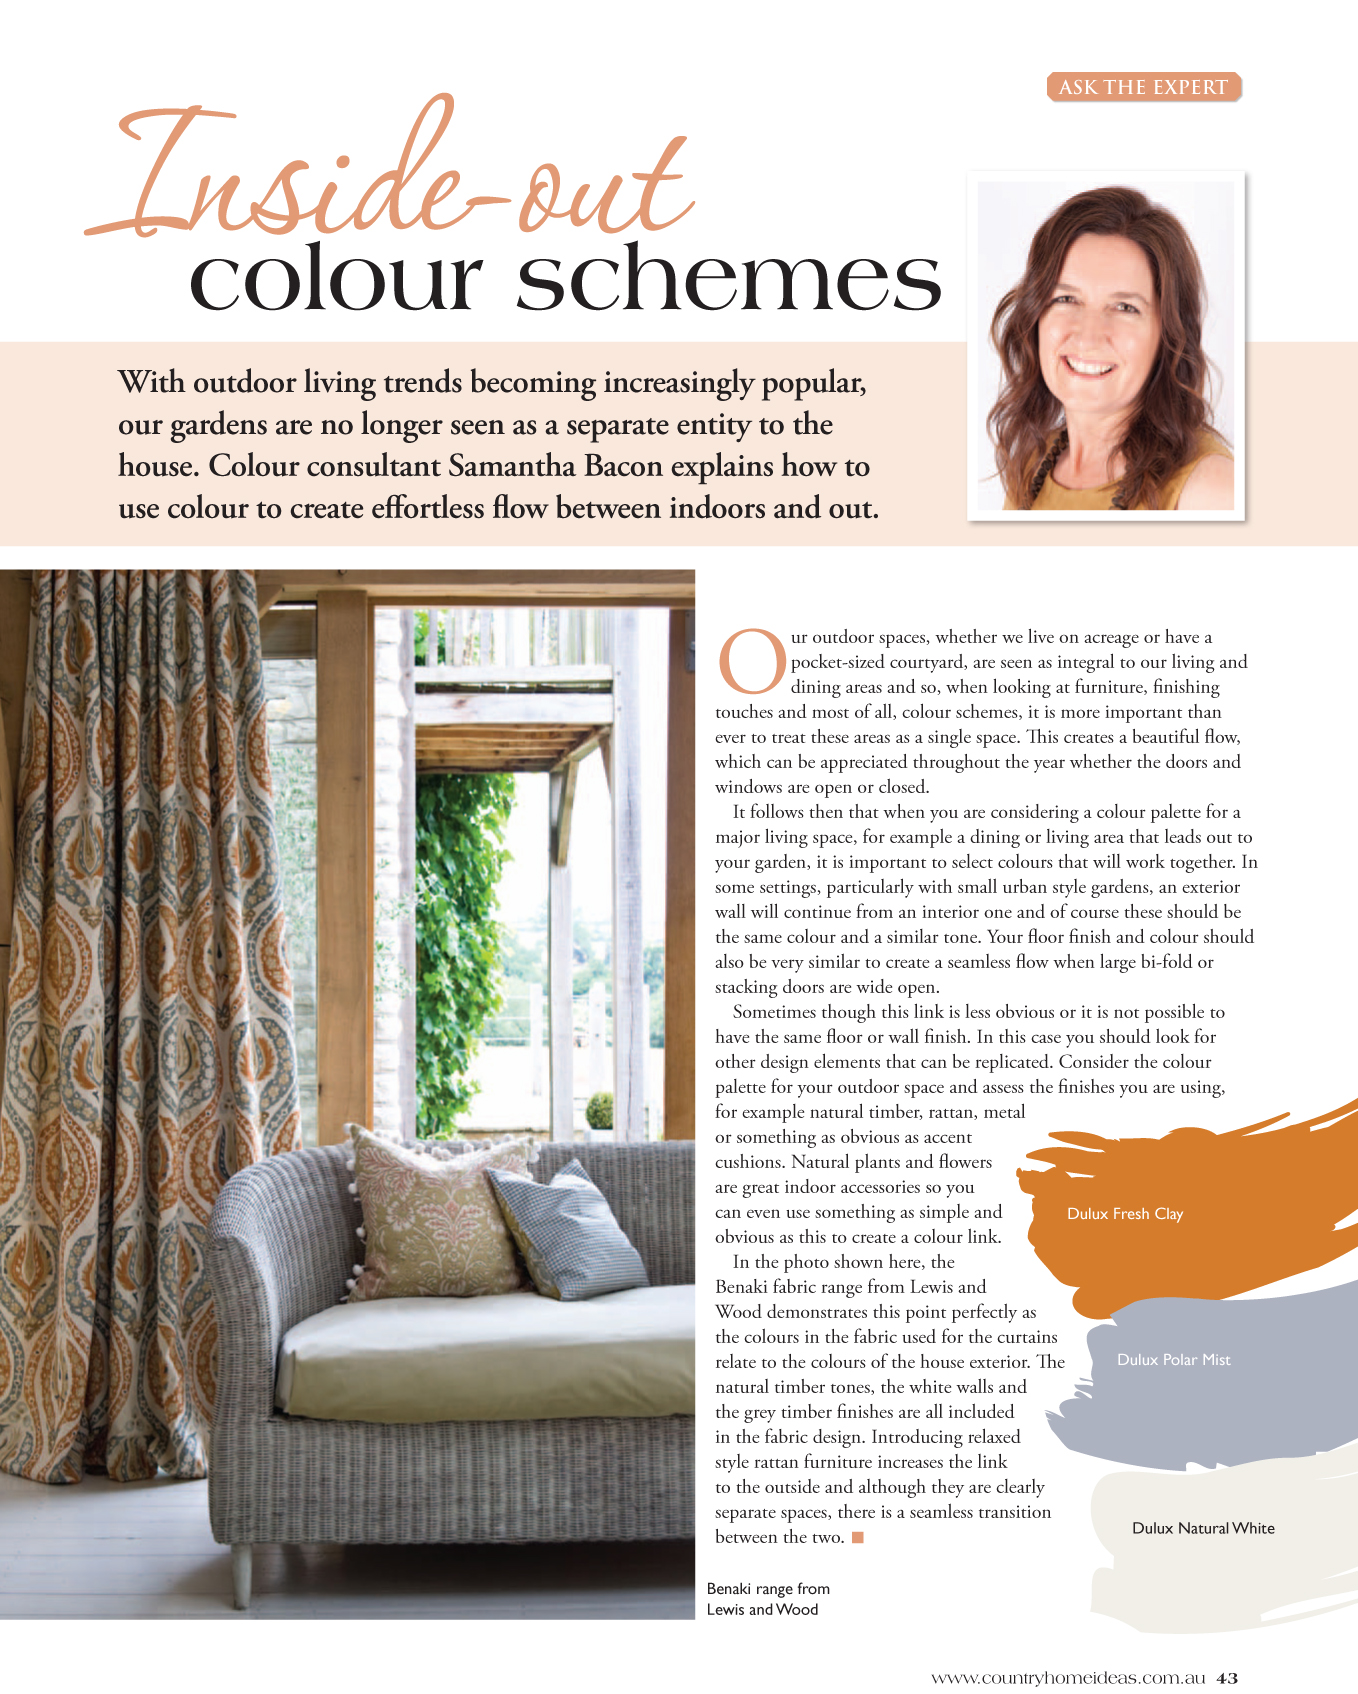 Country Home Ideas Magazine - Inside-out Colour Schemes